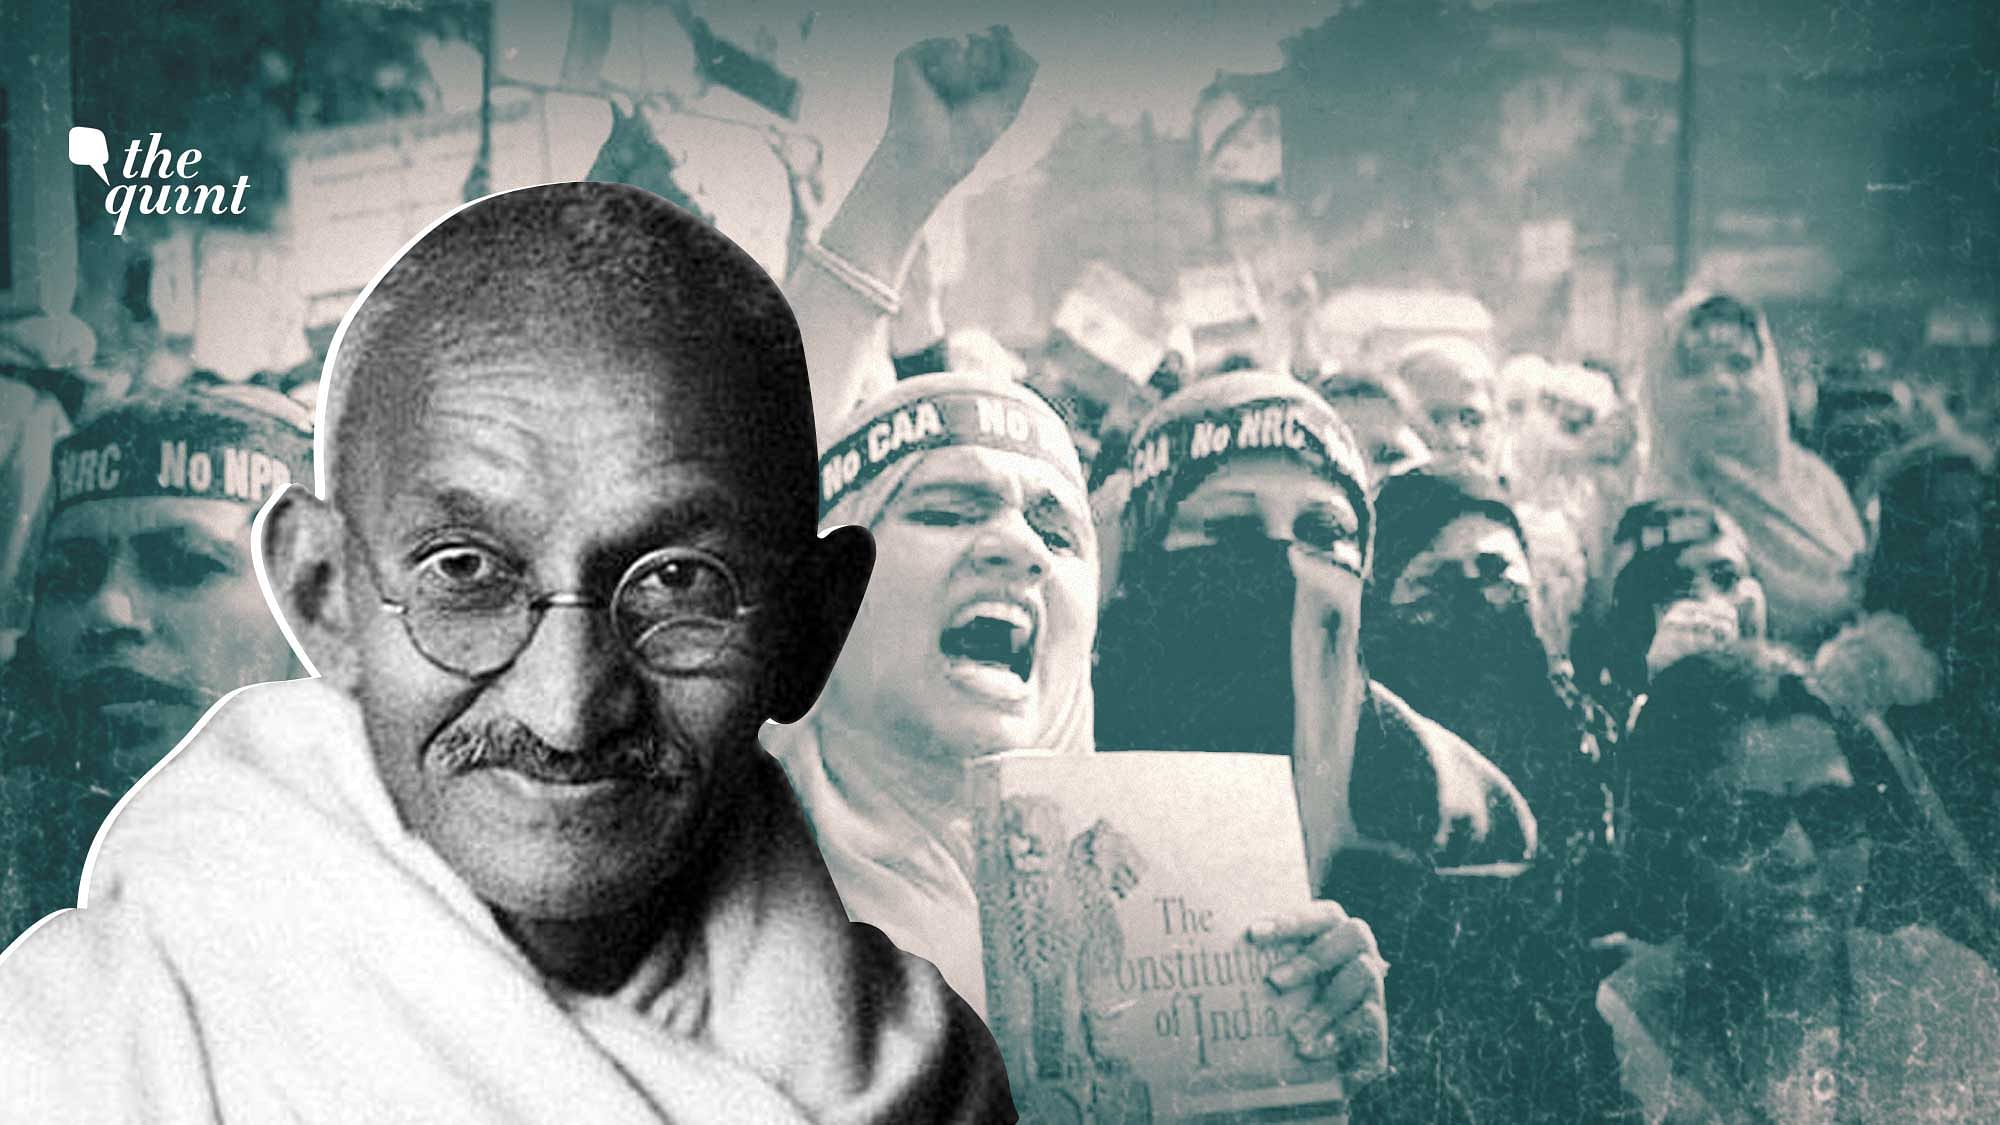 Image of Gandhi ji superimposed on an anti-CAA protest photo, used for representational purposes.